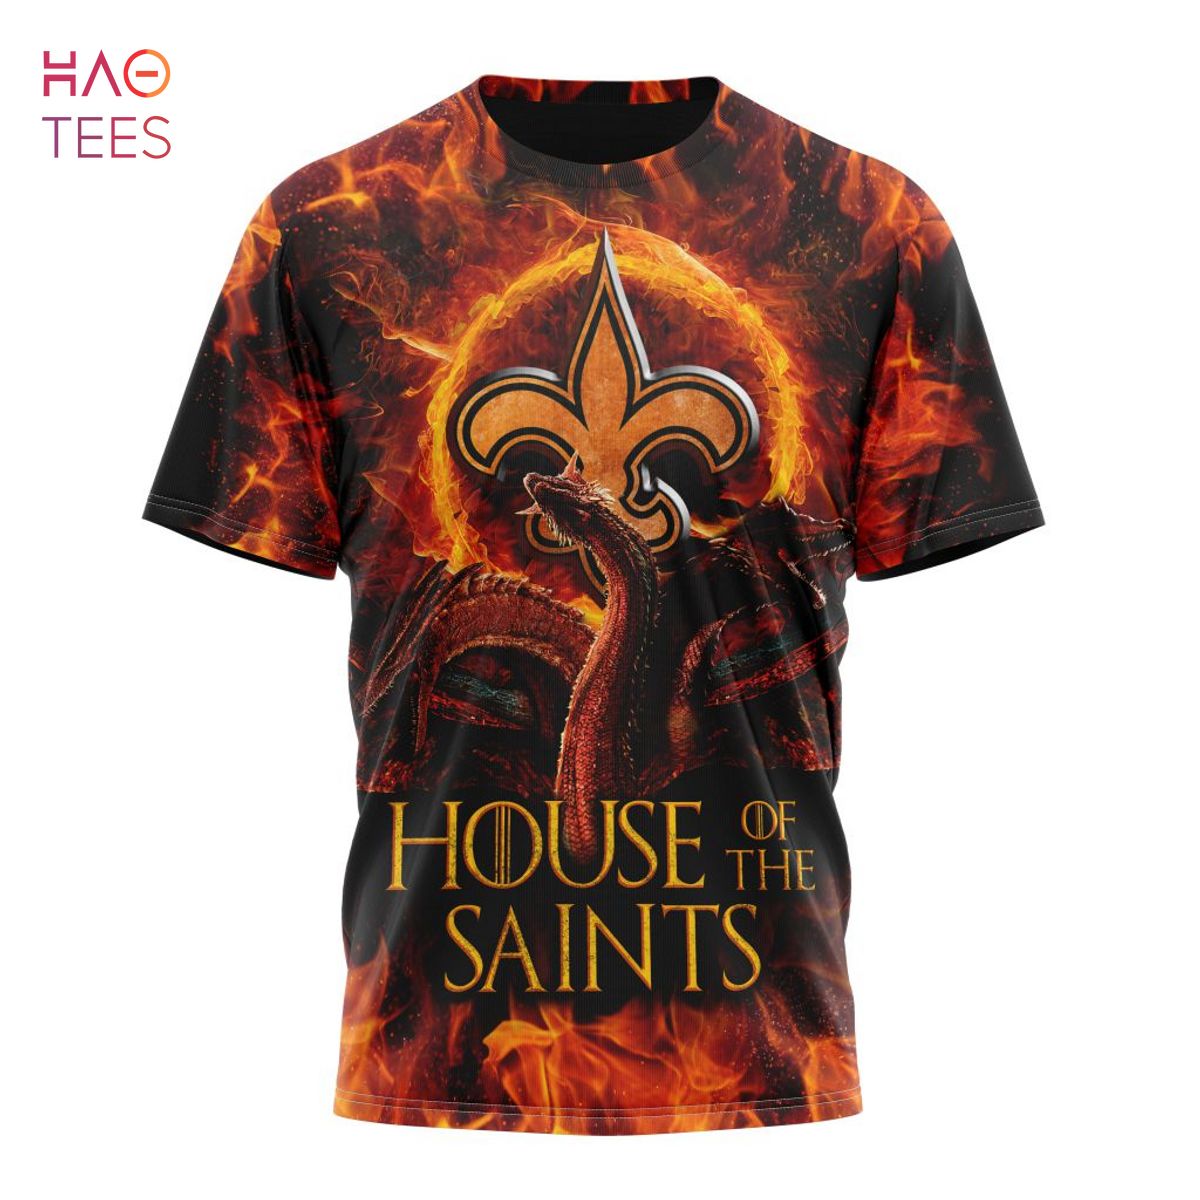 BEST NFL New Orleans Saints GAME OF THRONES - HOUSE OF THE SAINTS 3D Hoodie